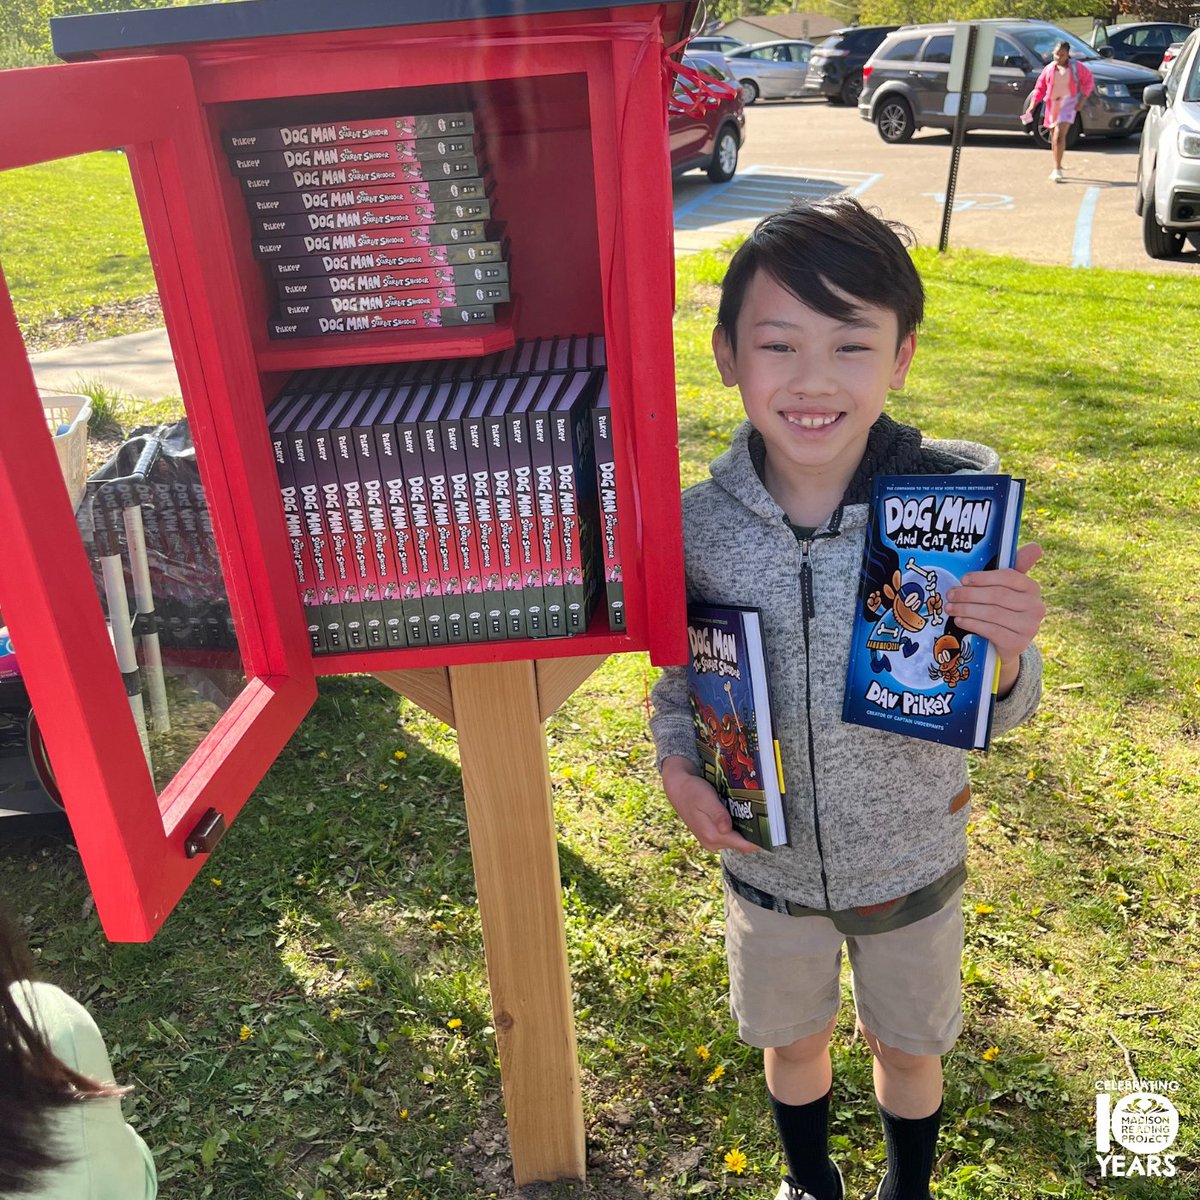 🤩 This kiddo from @madisonschools Lake View Elementary School brought a pre-loved copy of Dogman to donate to the school's brand-new little free library!
@LtlFreeLibrary
@Scholastic

#LiteracyMatters #NewBookFeeling #MadisonReadingProject